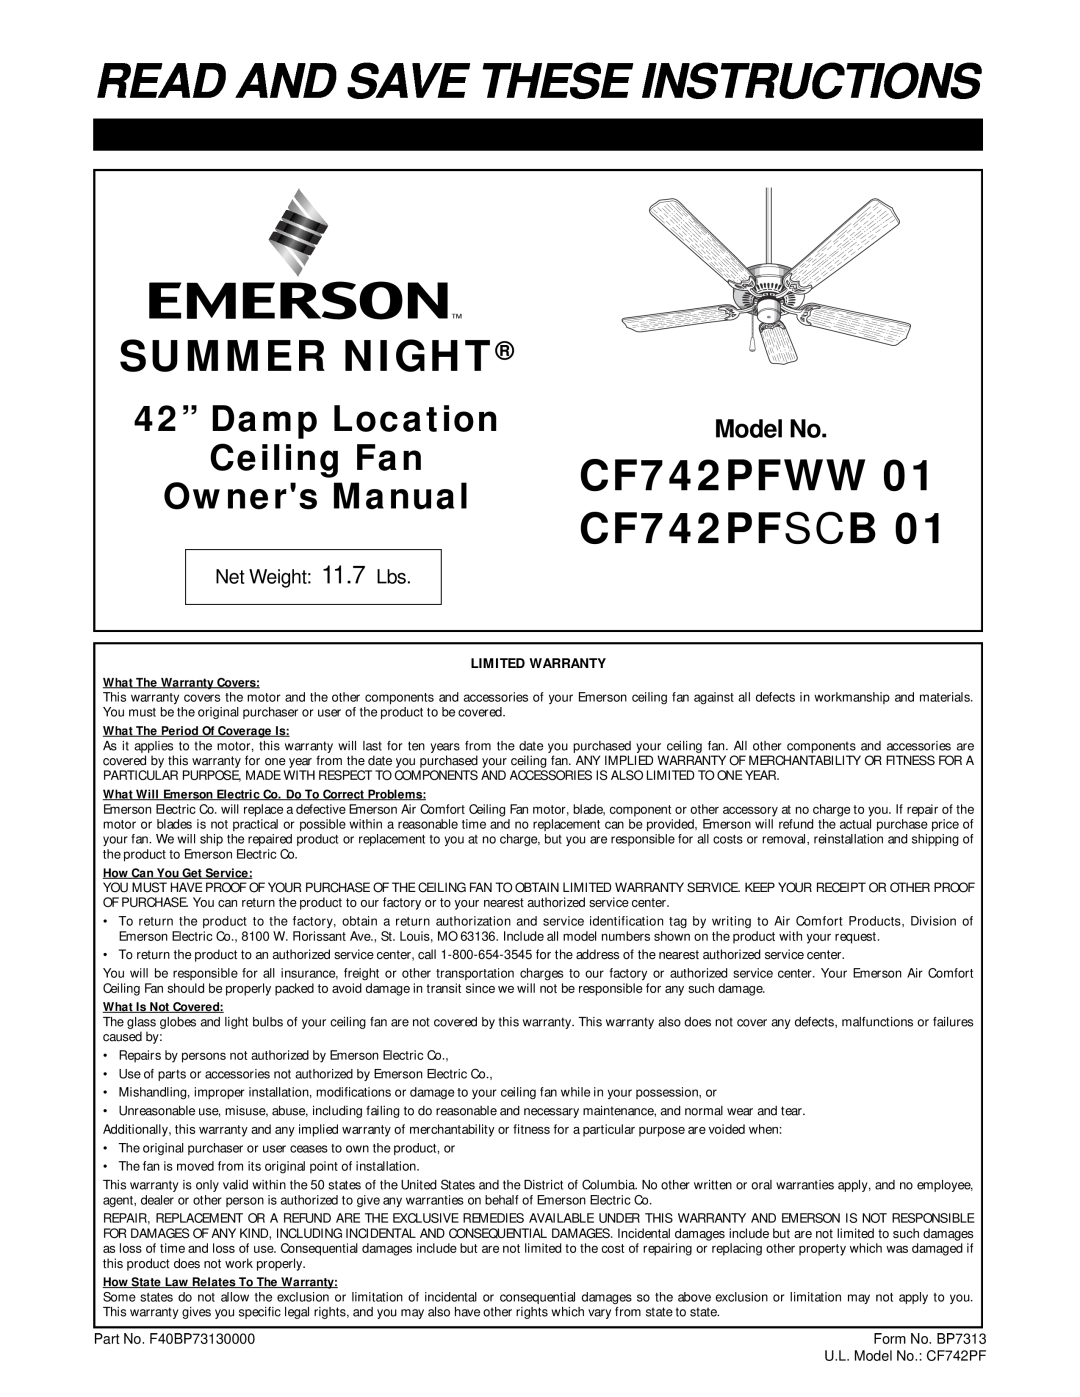 Emerson CF742PFWW 01 warranty Model No, Read And Save These Instructions, Summer Night, CF742PFSCB, 42” Damp Location 